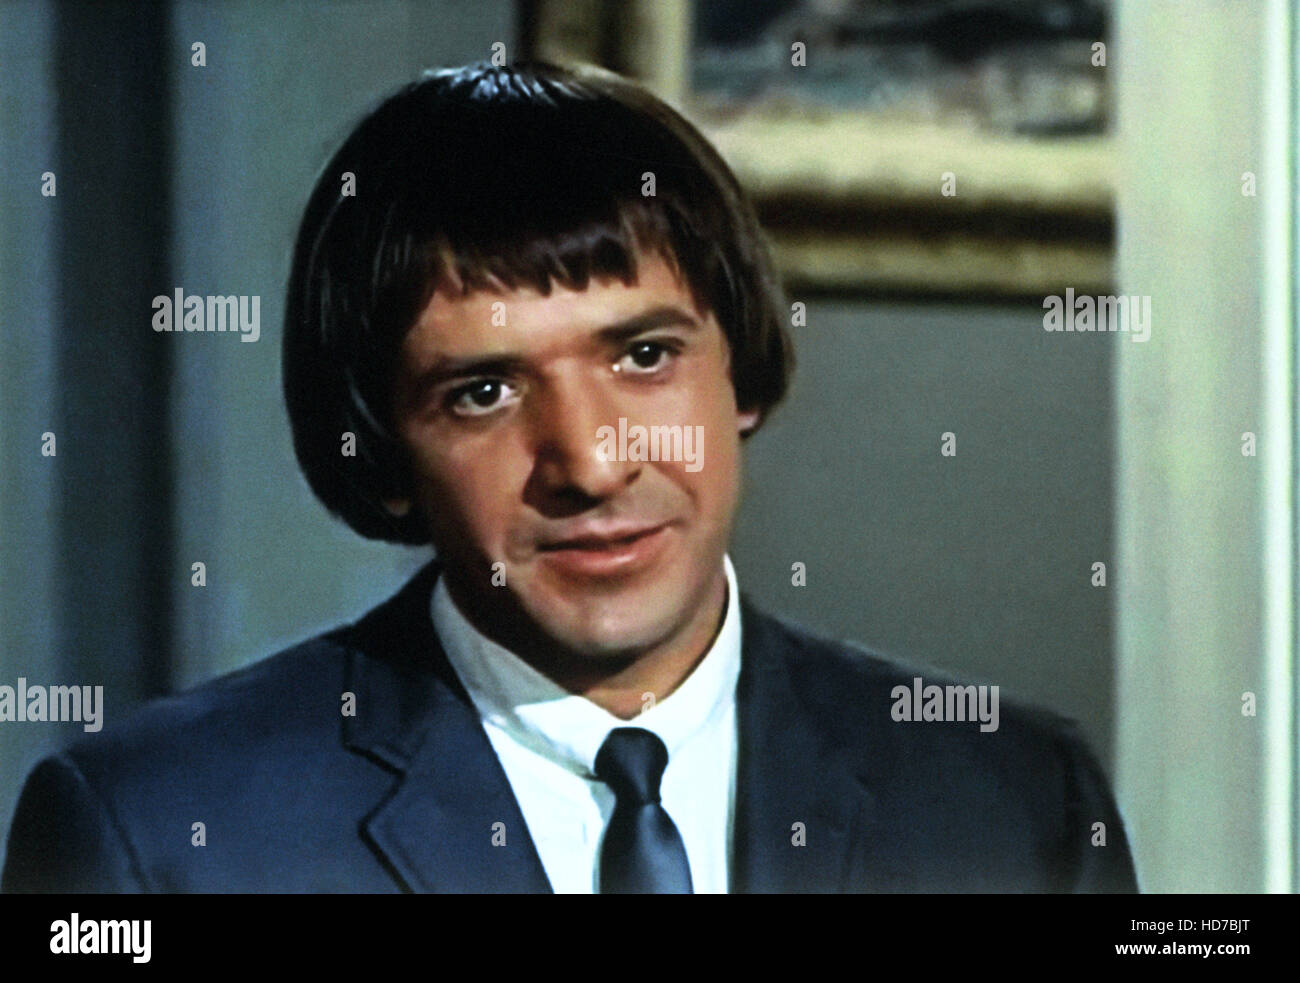 THE MAN FROM U.N.C.L.E., Sonny Bono, 'The Hot Number Affair', (Season 3, aired March 10, 1967), 1964-68. Stock Photo